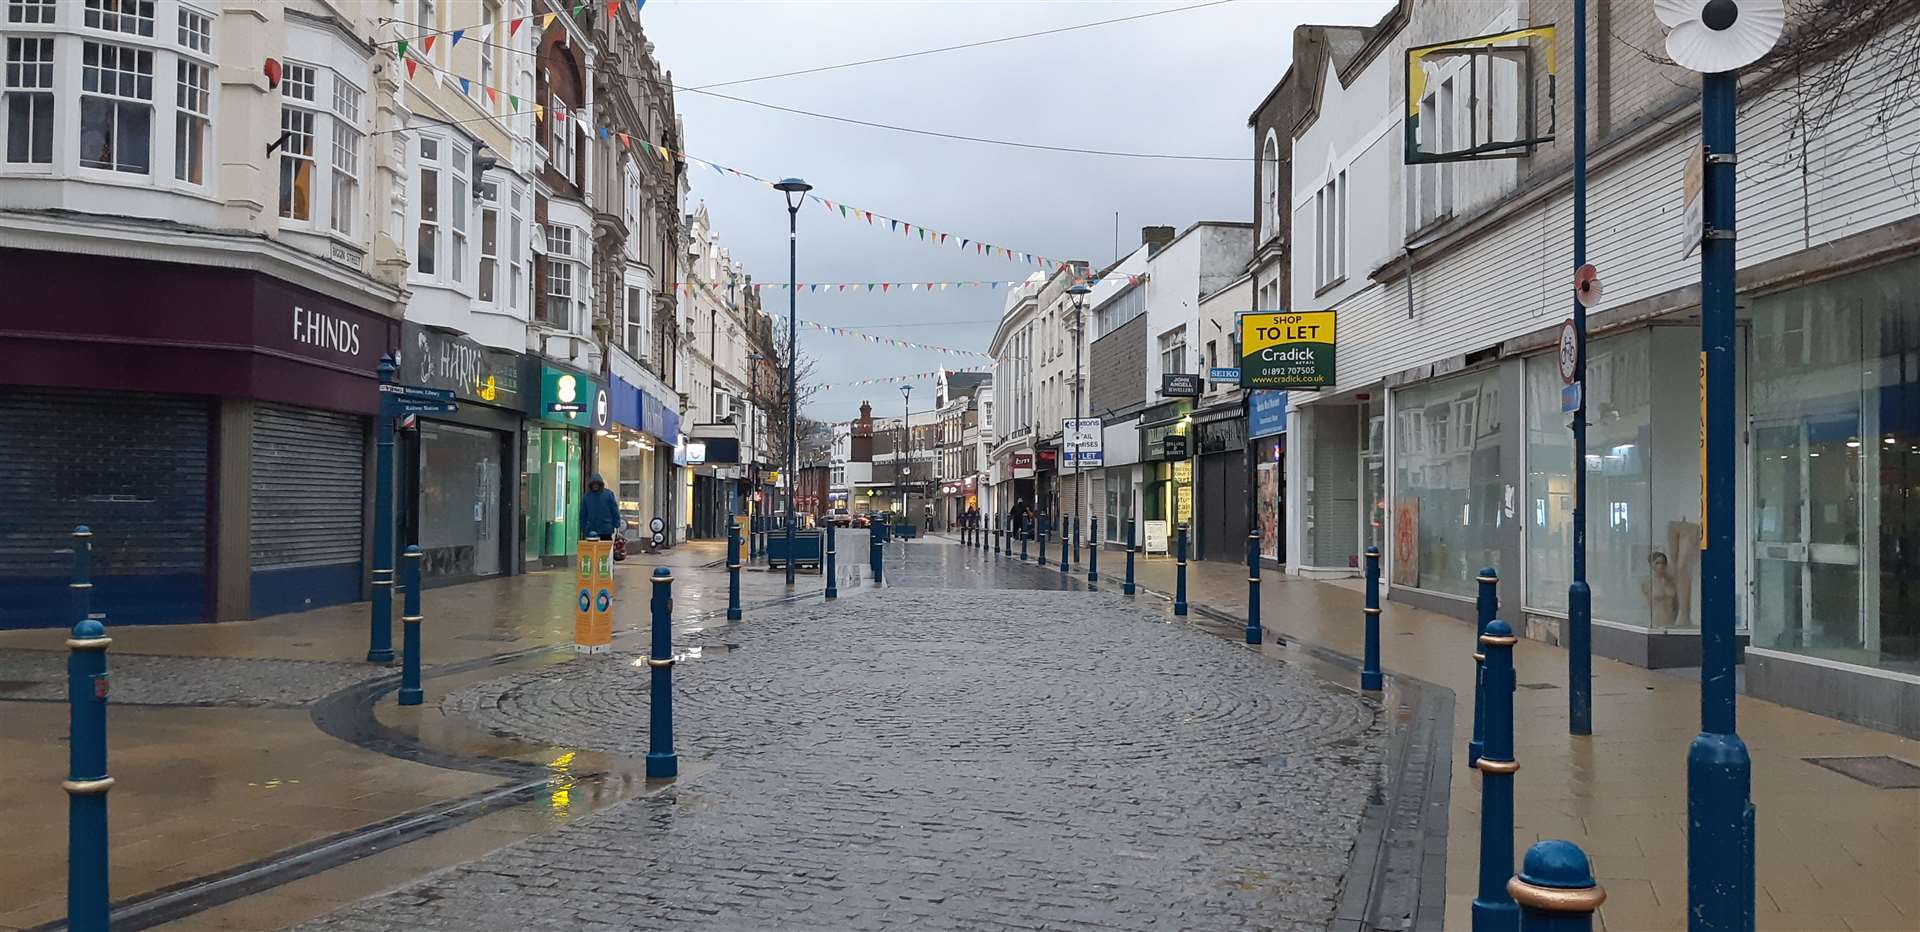 Town centres, as here in Biggin Street, Dover, were deserted during the lockdowns, so causing economic hardship. Library picture: Sam Lennon KMG